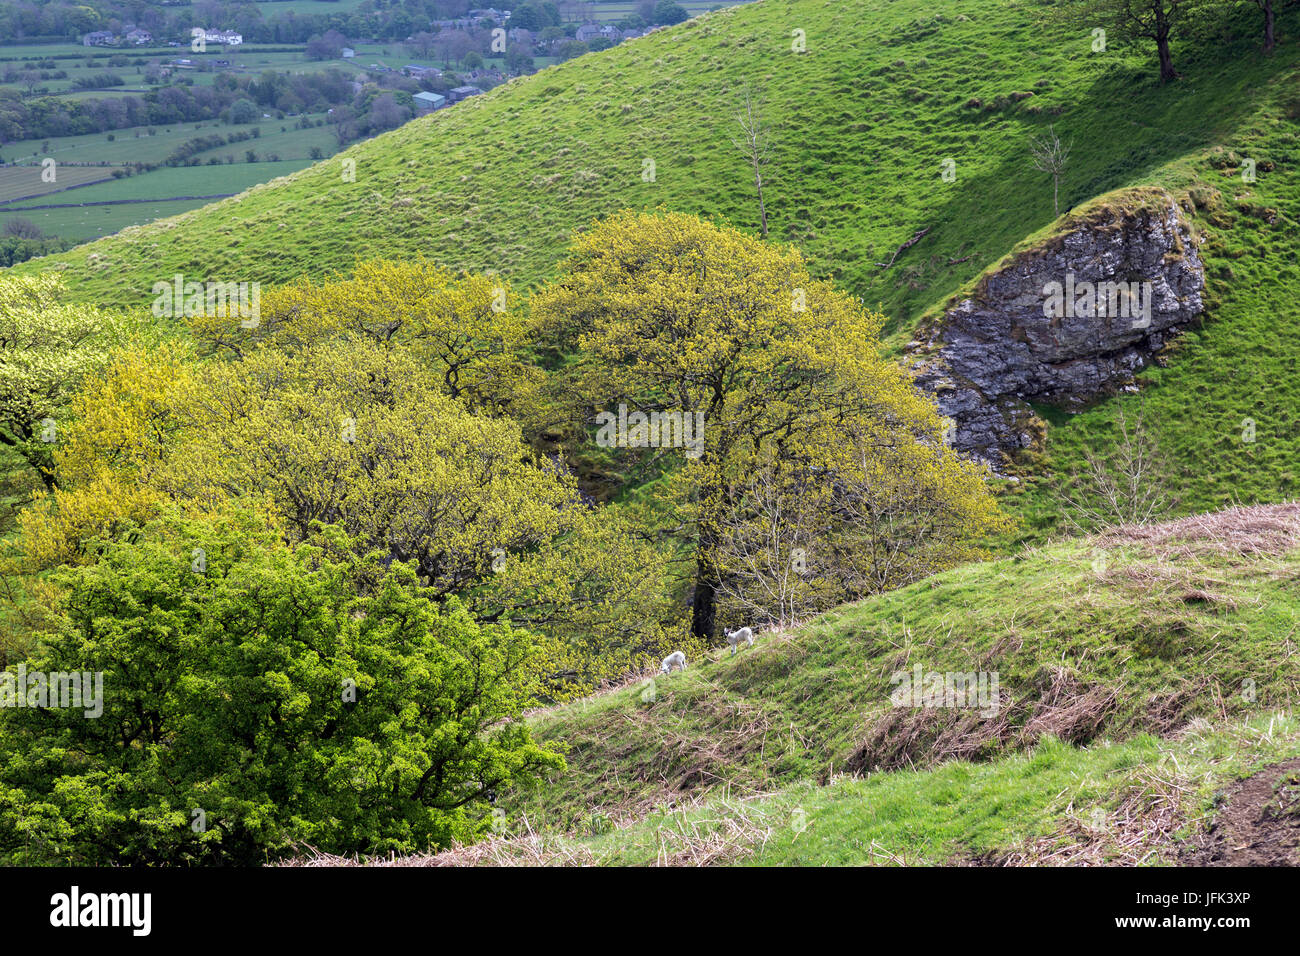 New leaf growth on the oak trees growing below the east face of Mam Tor in the Peak District, Derbyshire, England, UK Stock Photo